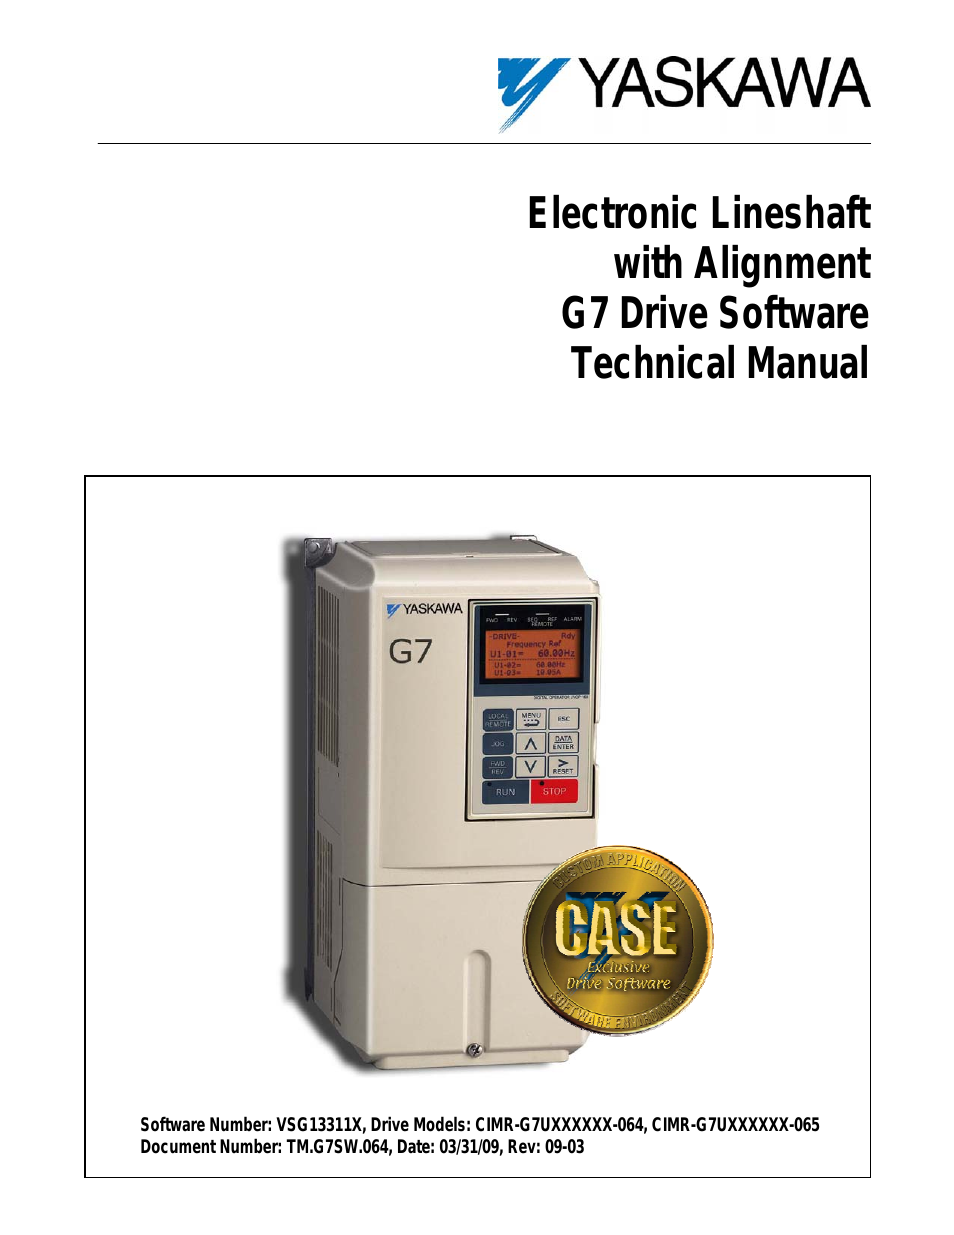 Electronic Lineshaft with Alignment G7 Drive Software